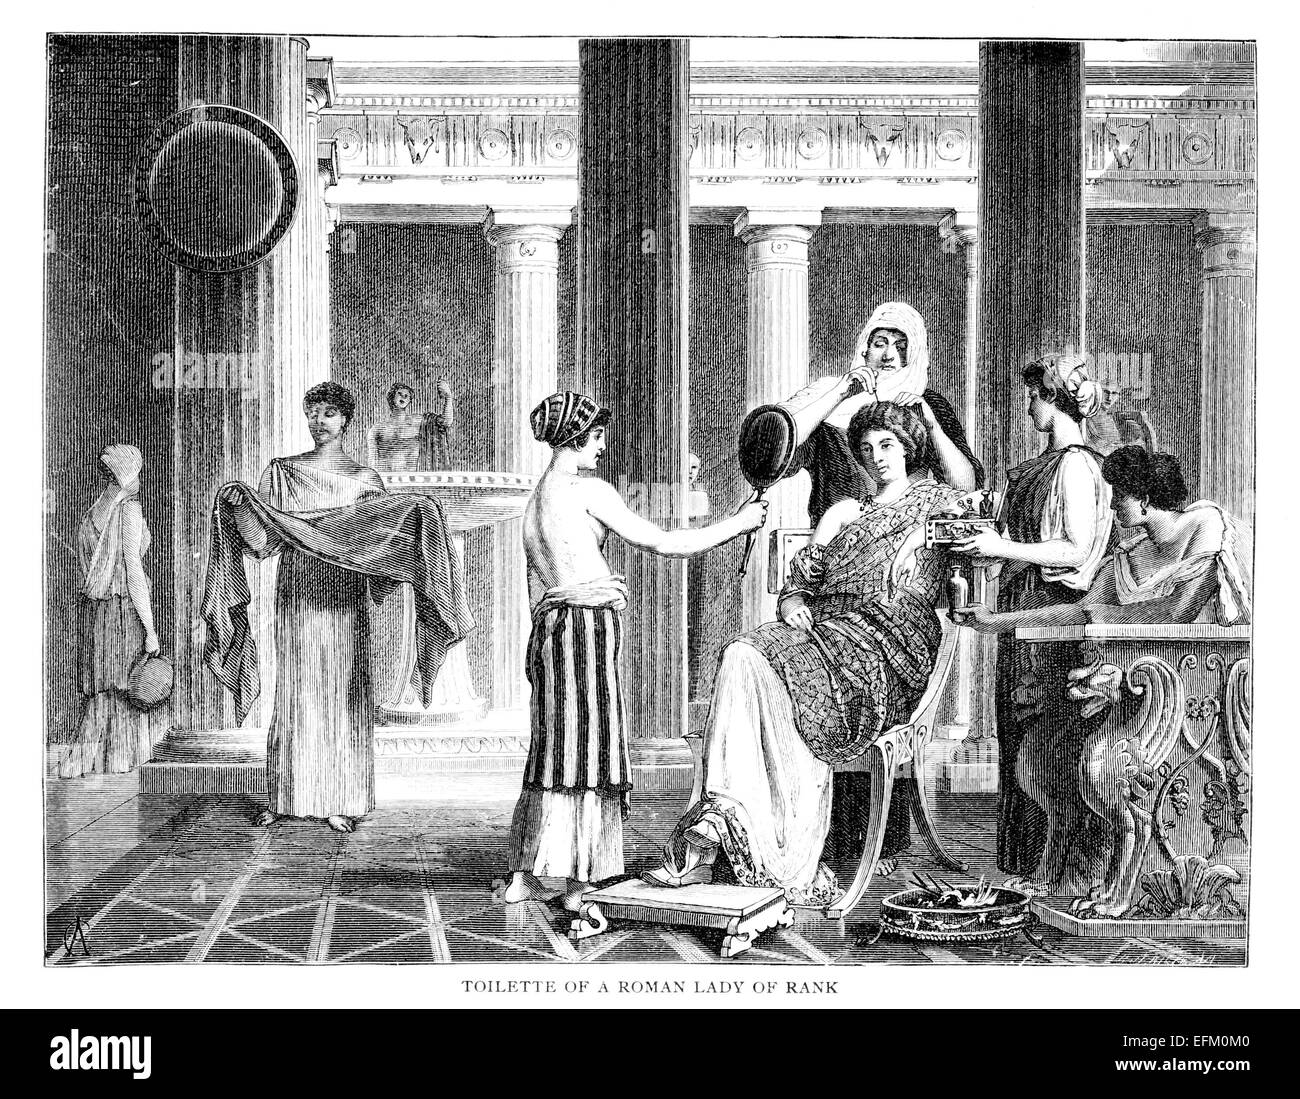 Victorian engraving of a wealthy Roman woman getting dressed. Digitally restored image from a mid-19th century Encyclopaedia. Stock Photo